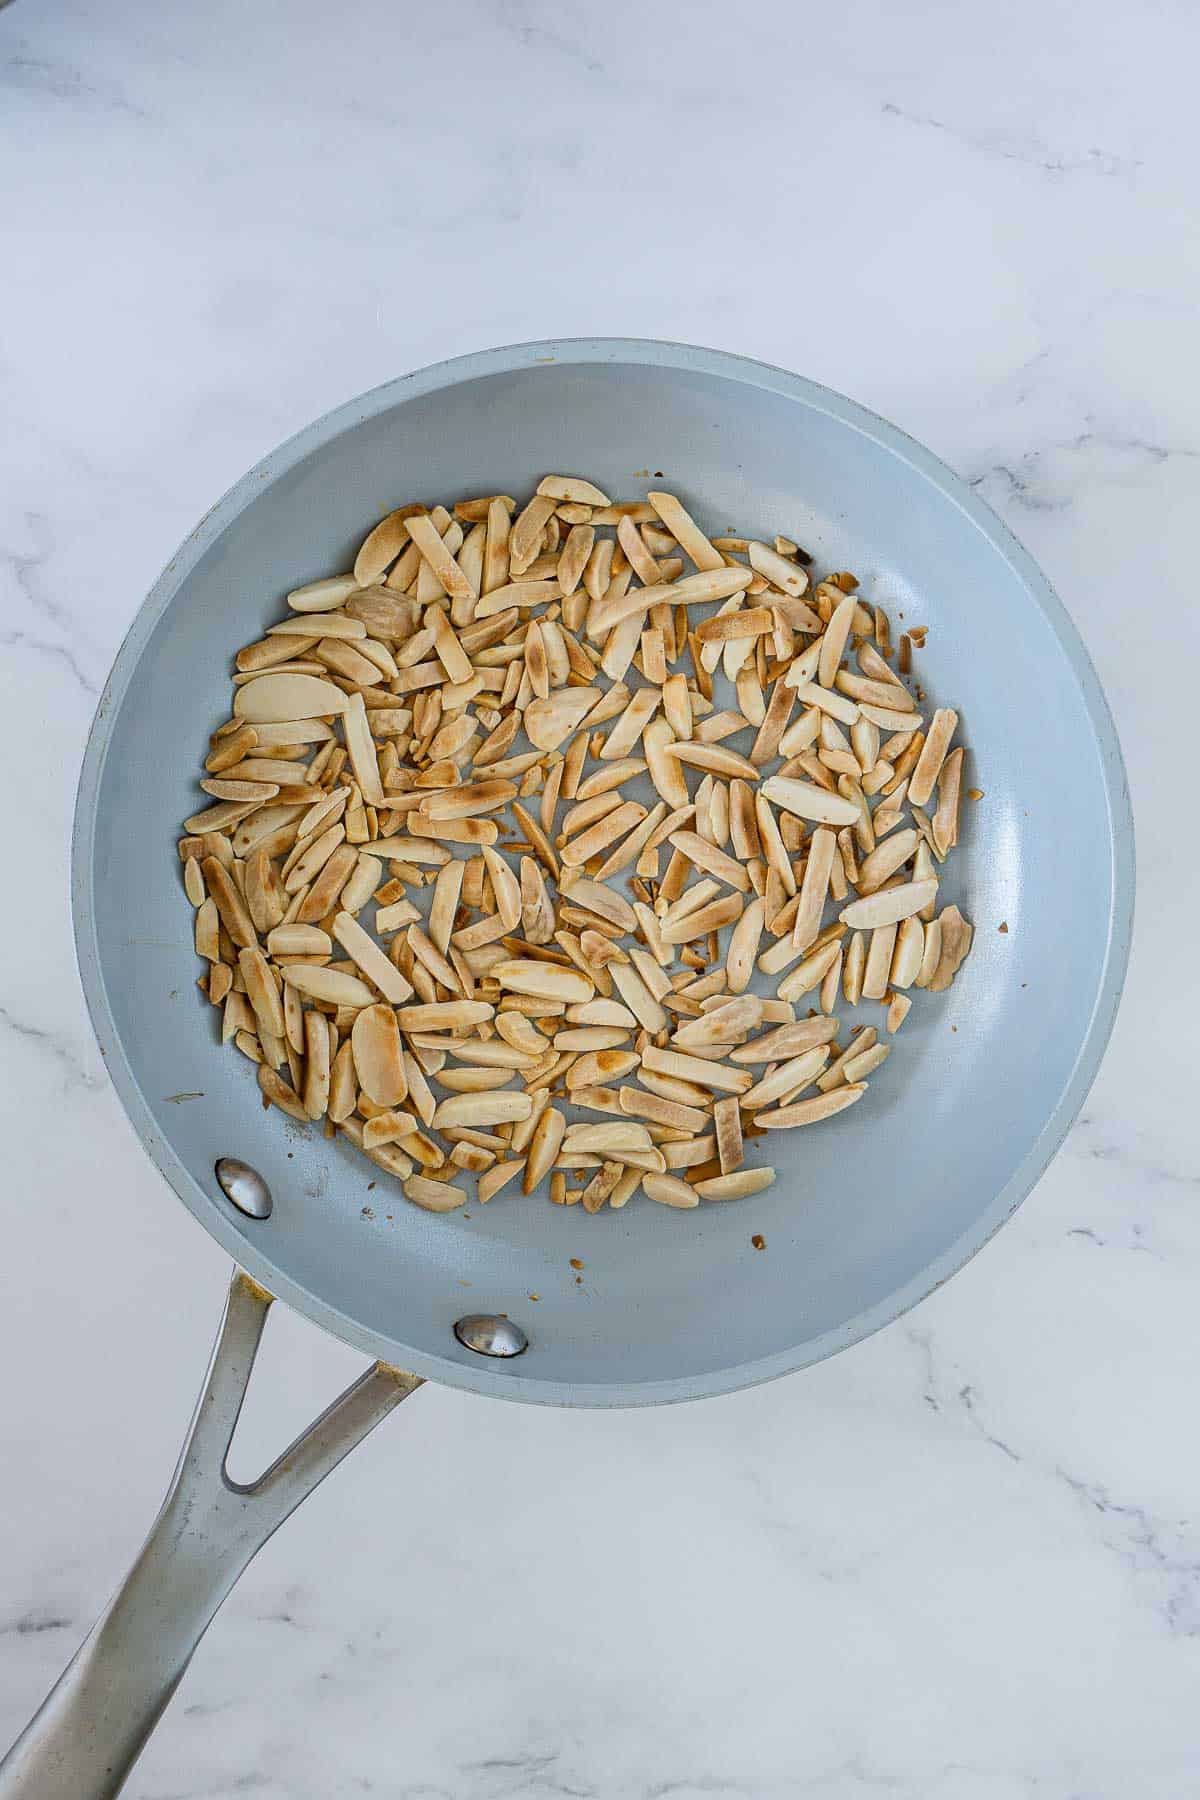 Slivered almonds toasting in a pan.